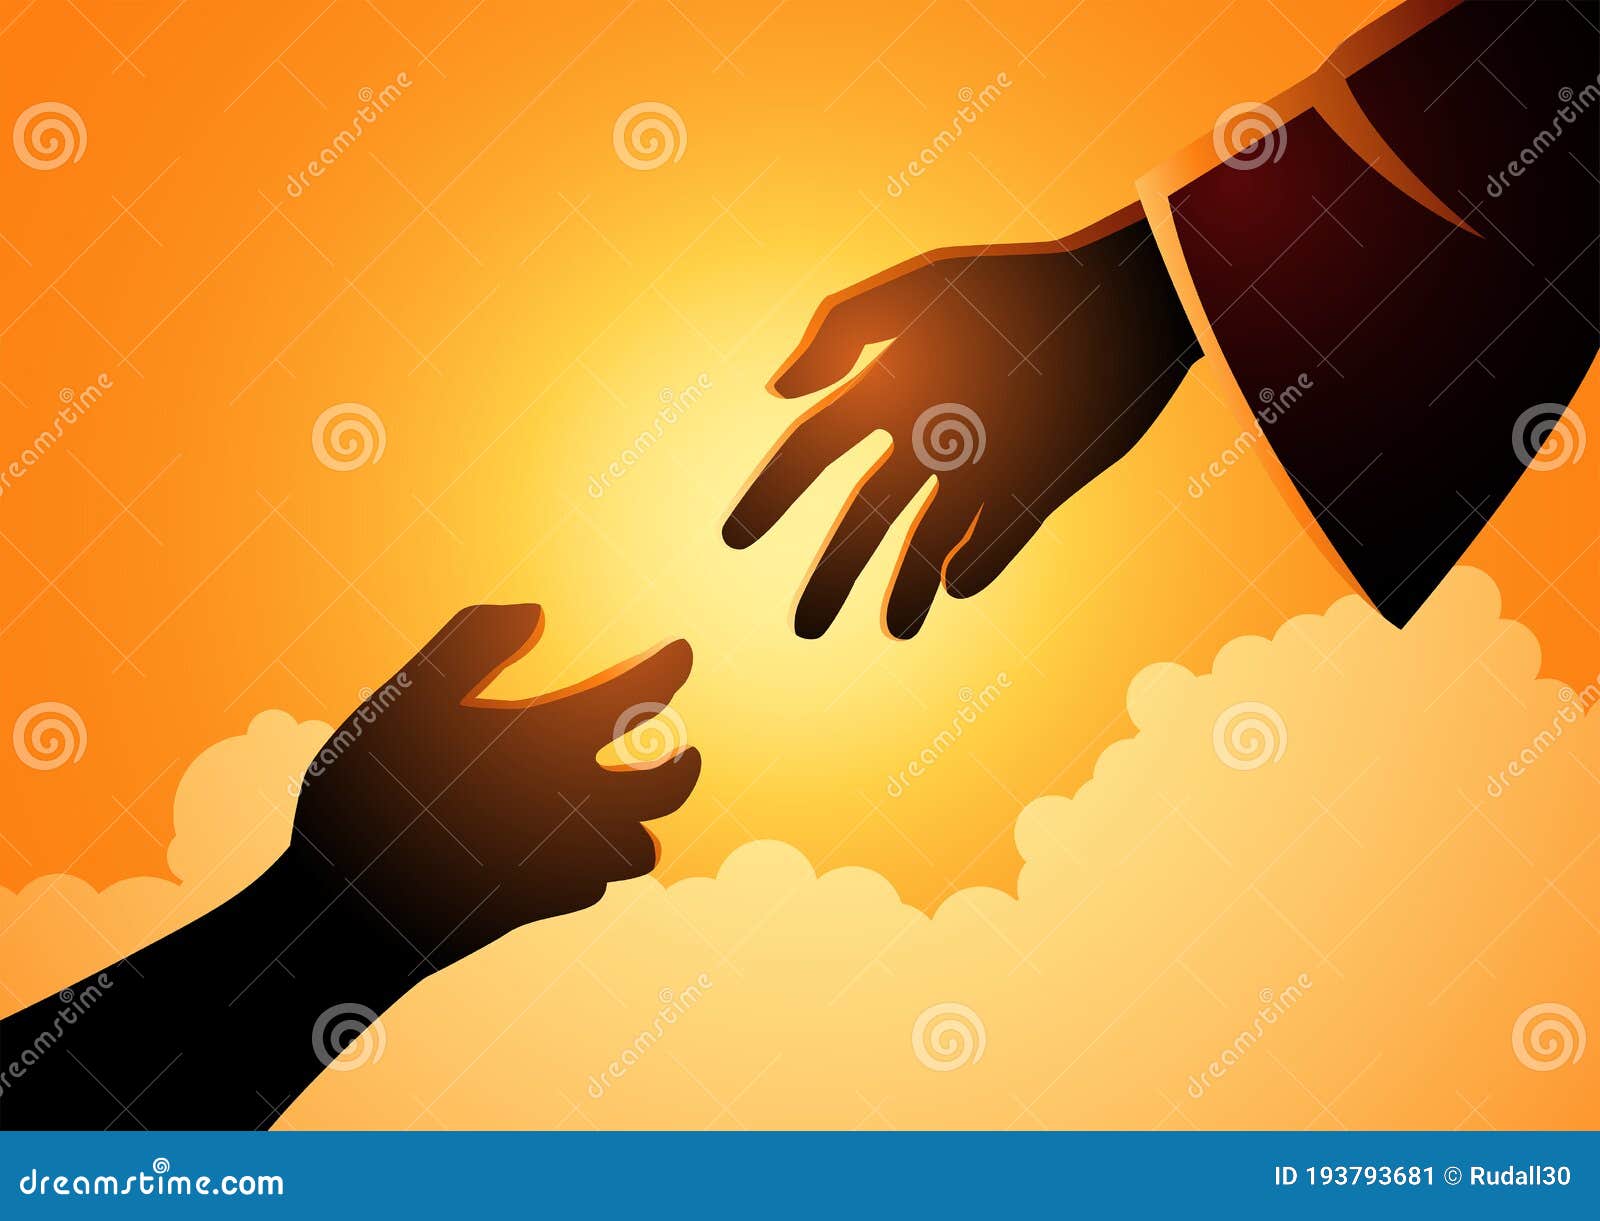 god hand reaching out for human hand